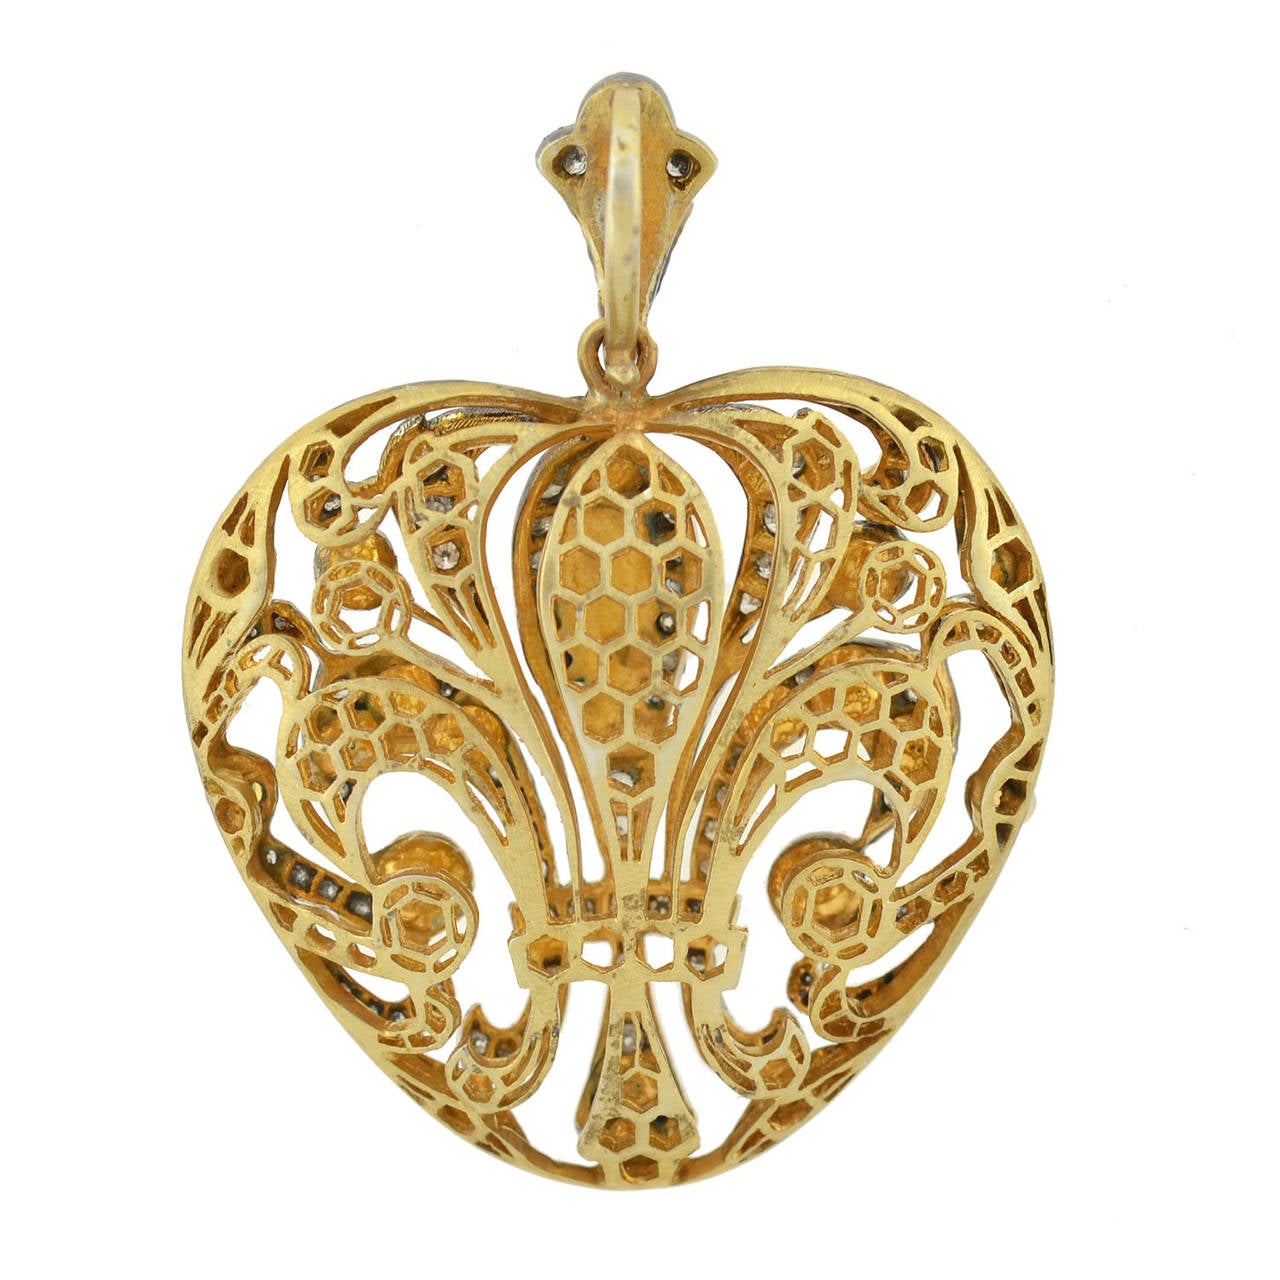 A spectacular fleur-de-lys heart pendant from the Edwardian era! This gorgeous three-dimensional heart pendant has a lacy filigree design that forms a beautiful fleur-de-lys on both sides. Decorating the entire front surface of the piece are